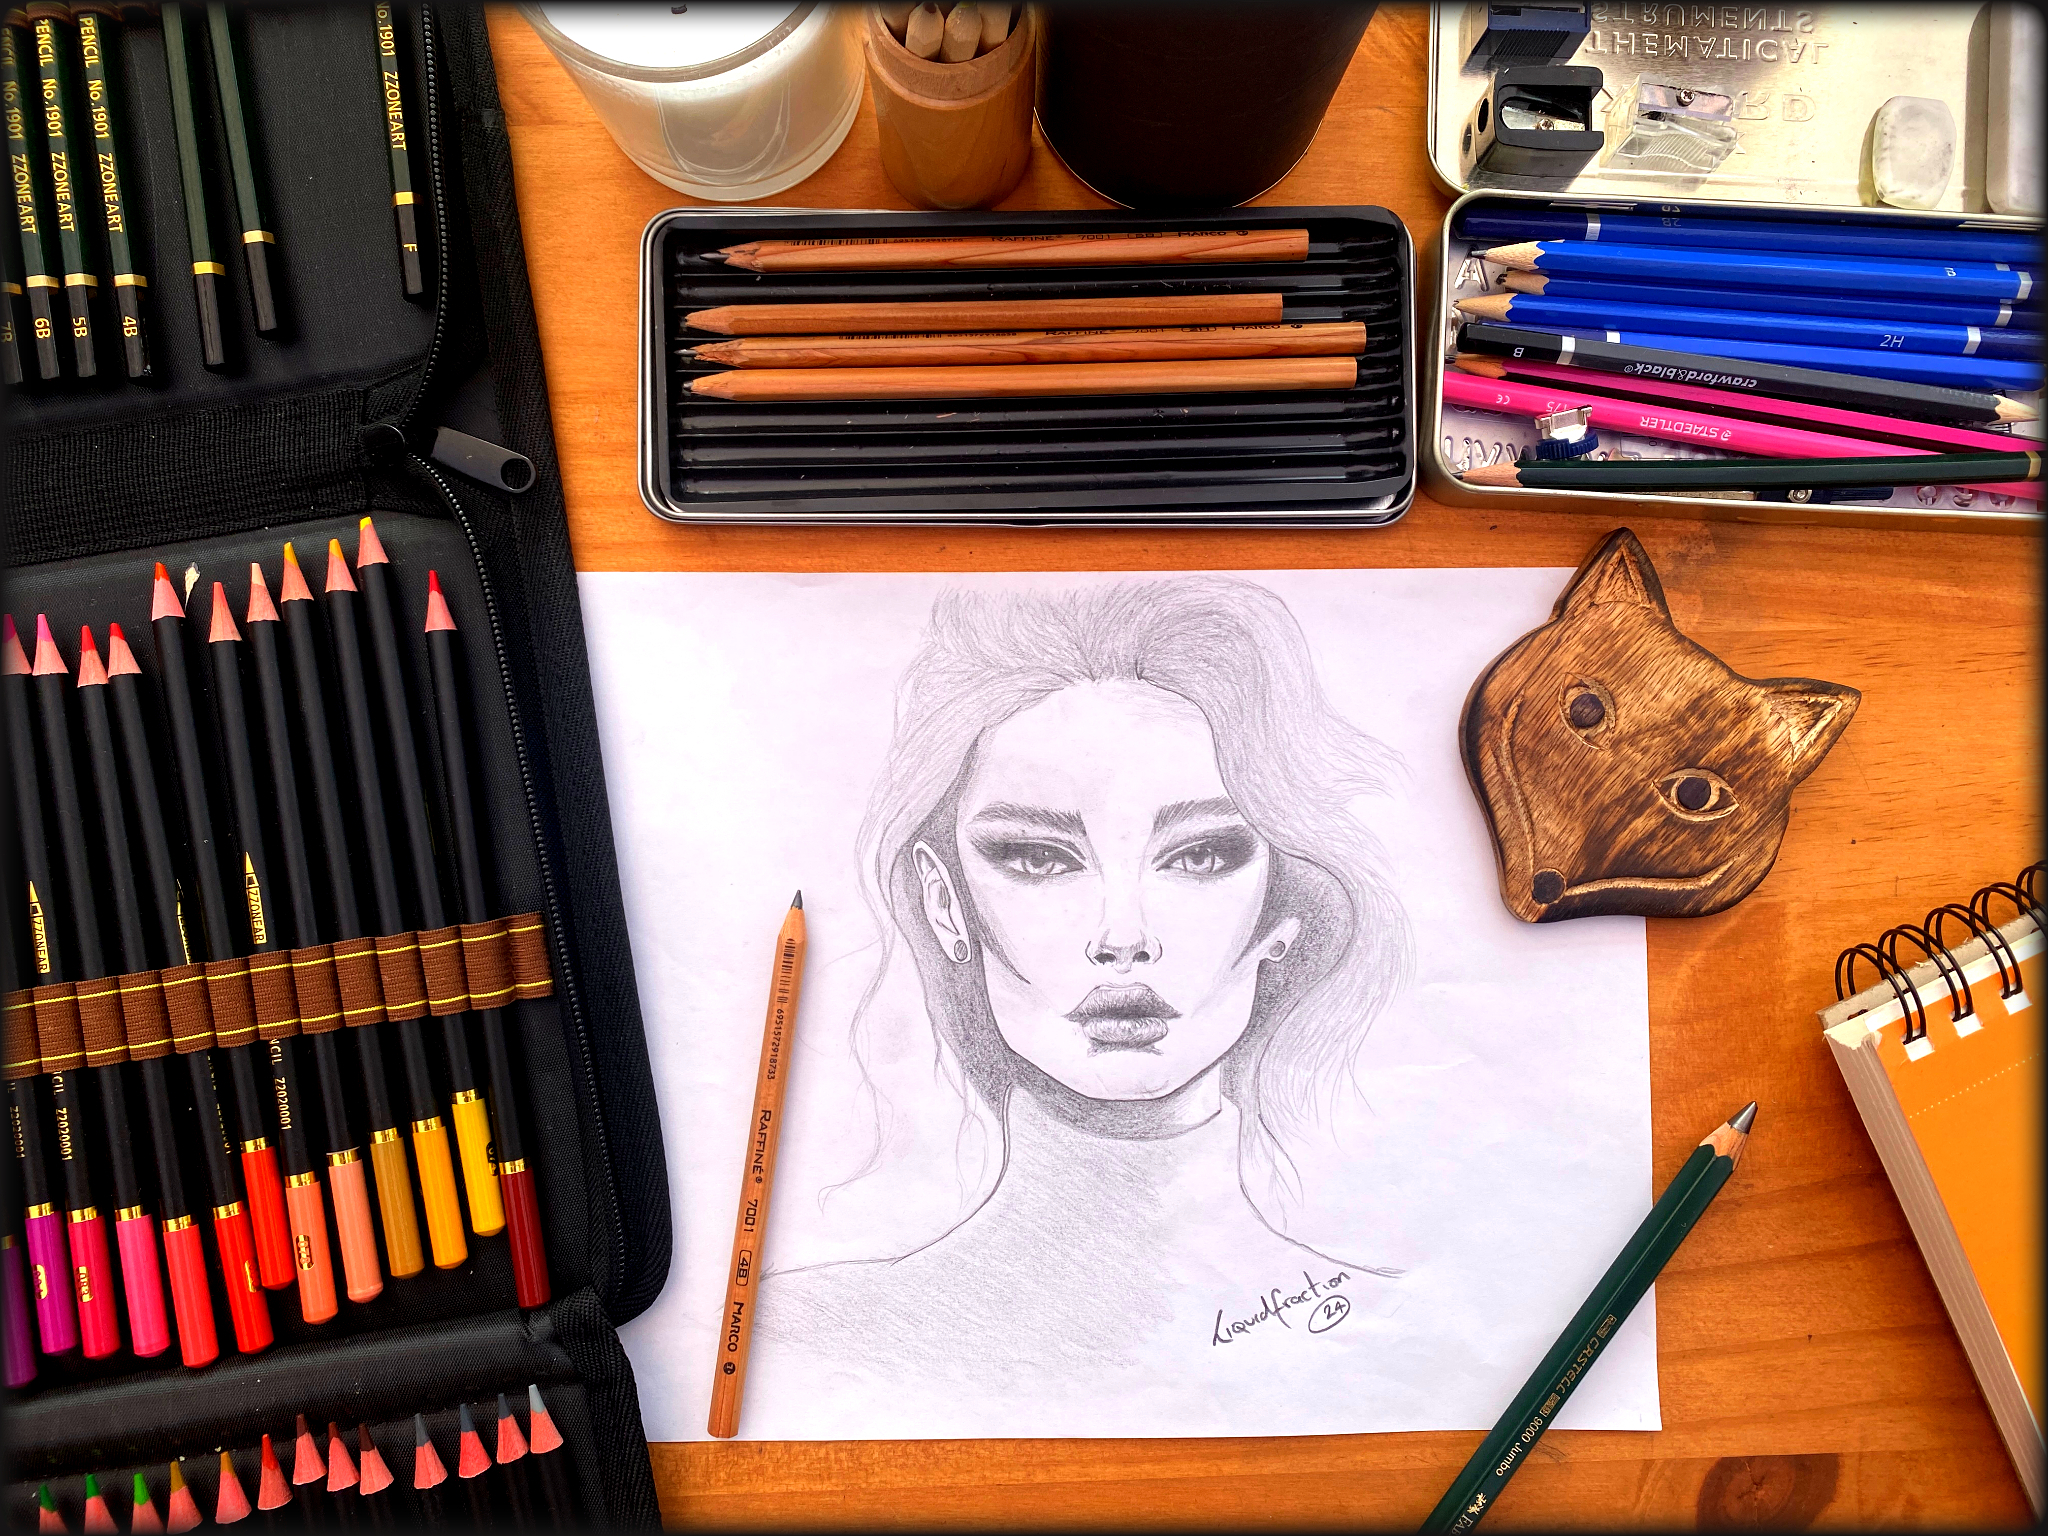 General 2048x1536 drawing pencil drawing sketches pencils wooden surface women juicy lips long hair frontal view earring face paper wood